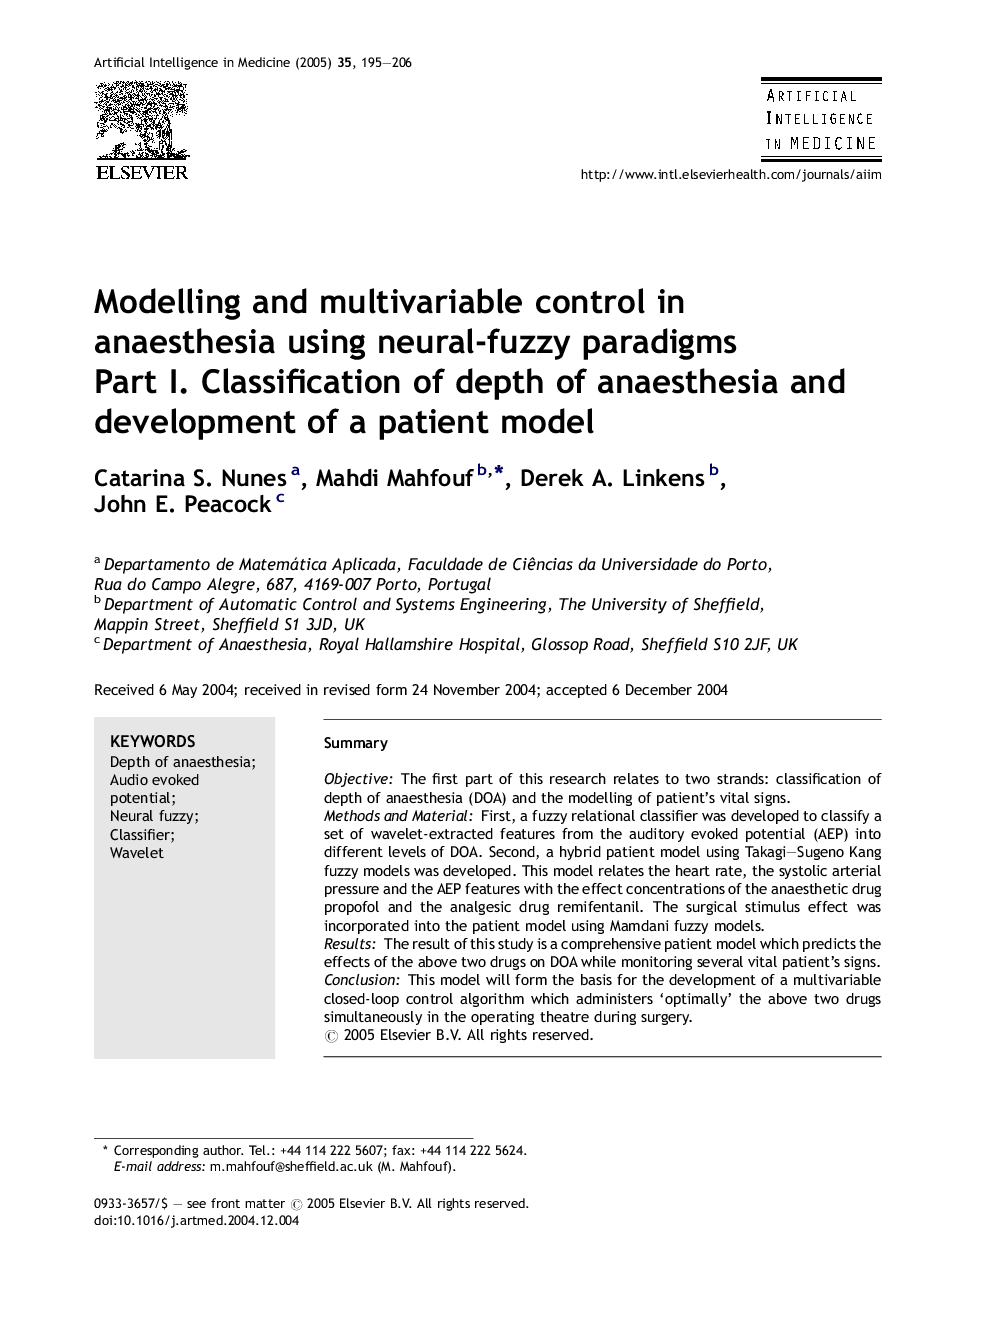 Modelling and multivariable control in anaesthesia using neural-fuzzy paradigms